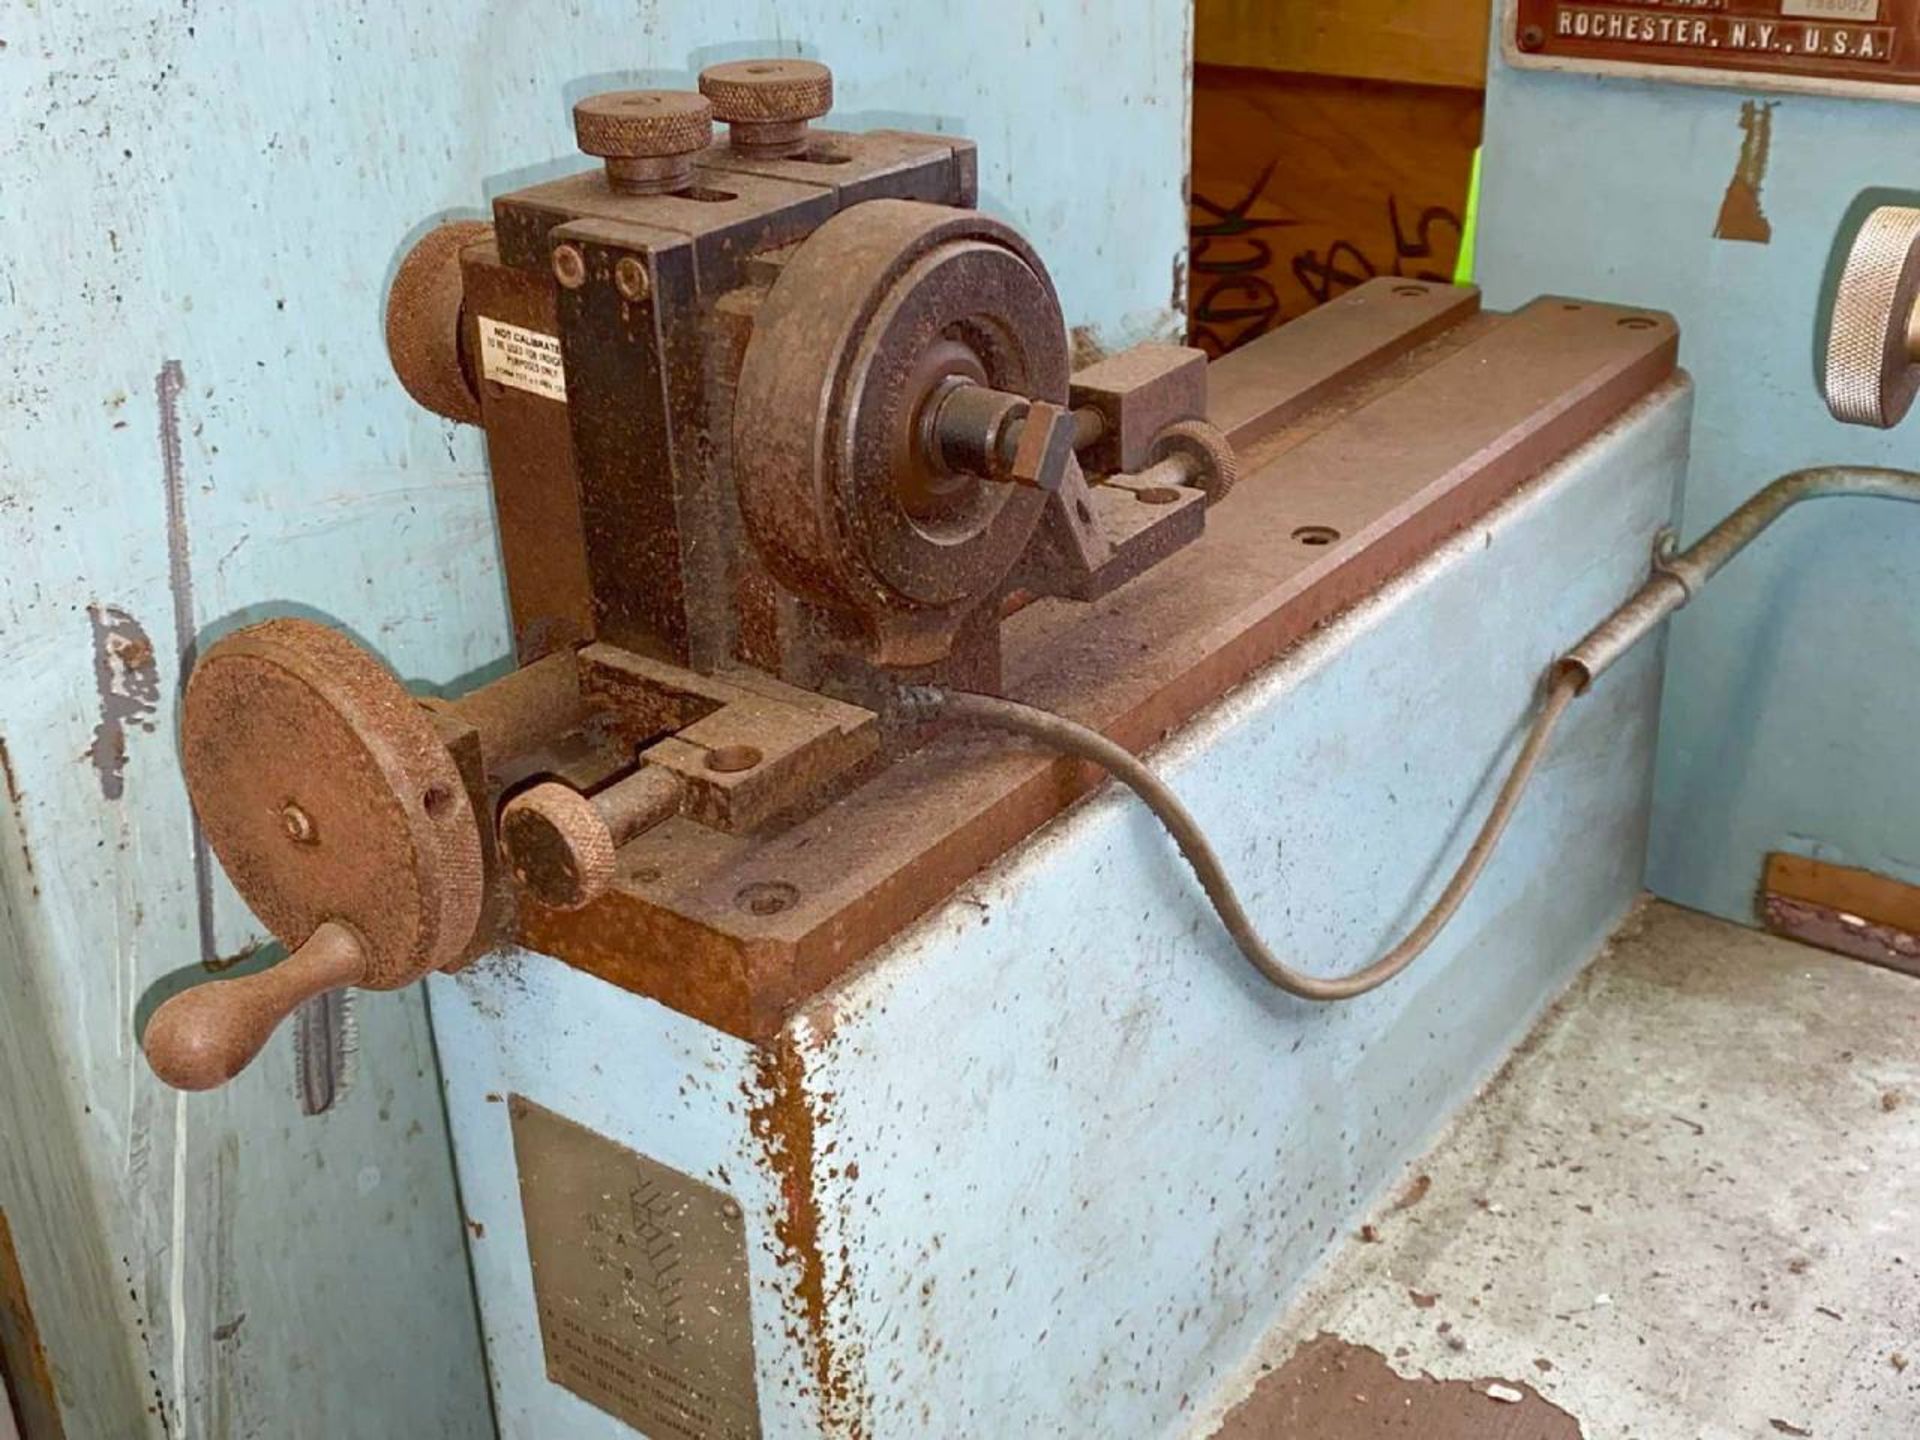 Gleason No. 563 Cutter Inspection Device - Image 3 of 4